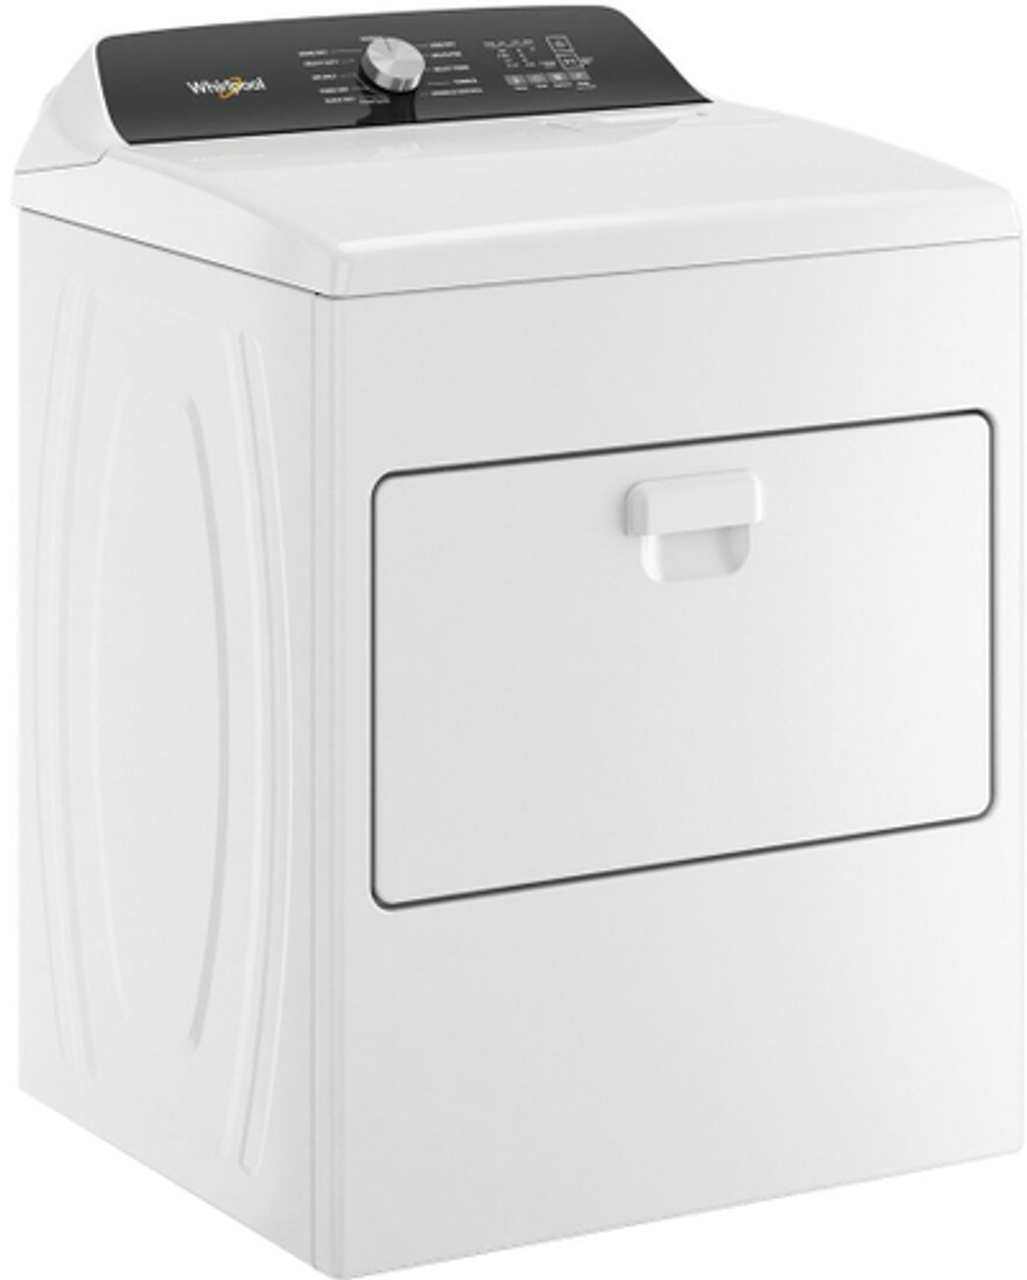 Whirlpool - Top Load Electric Dryer